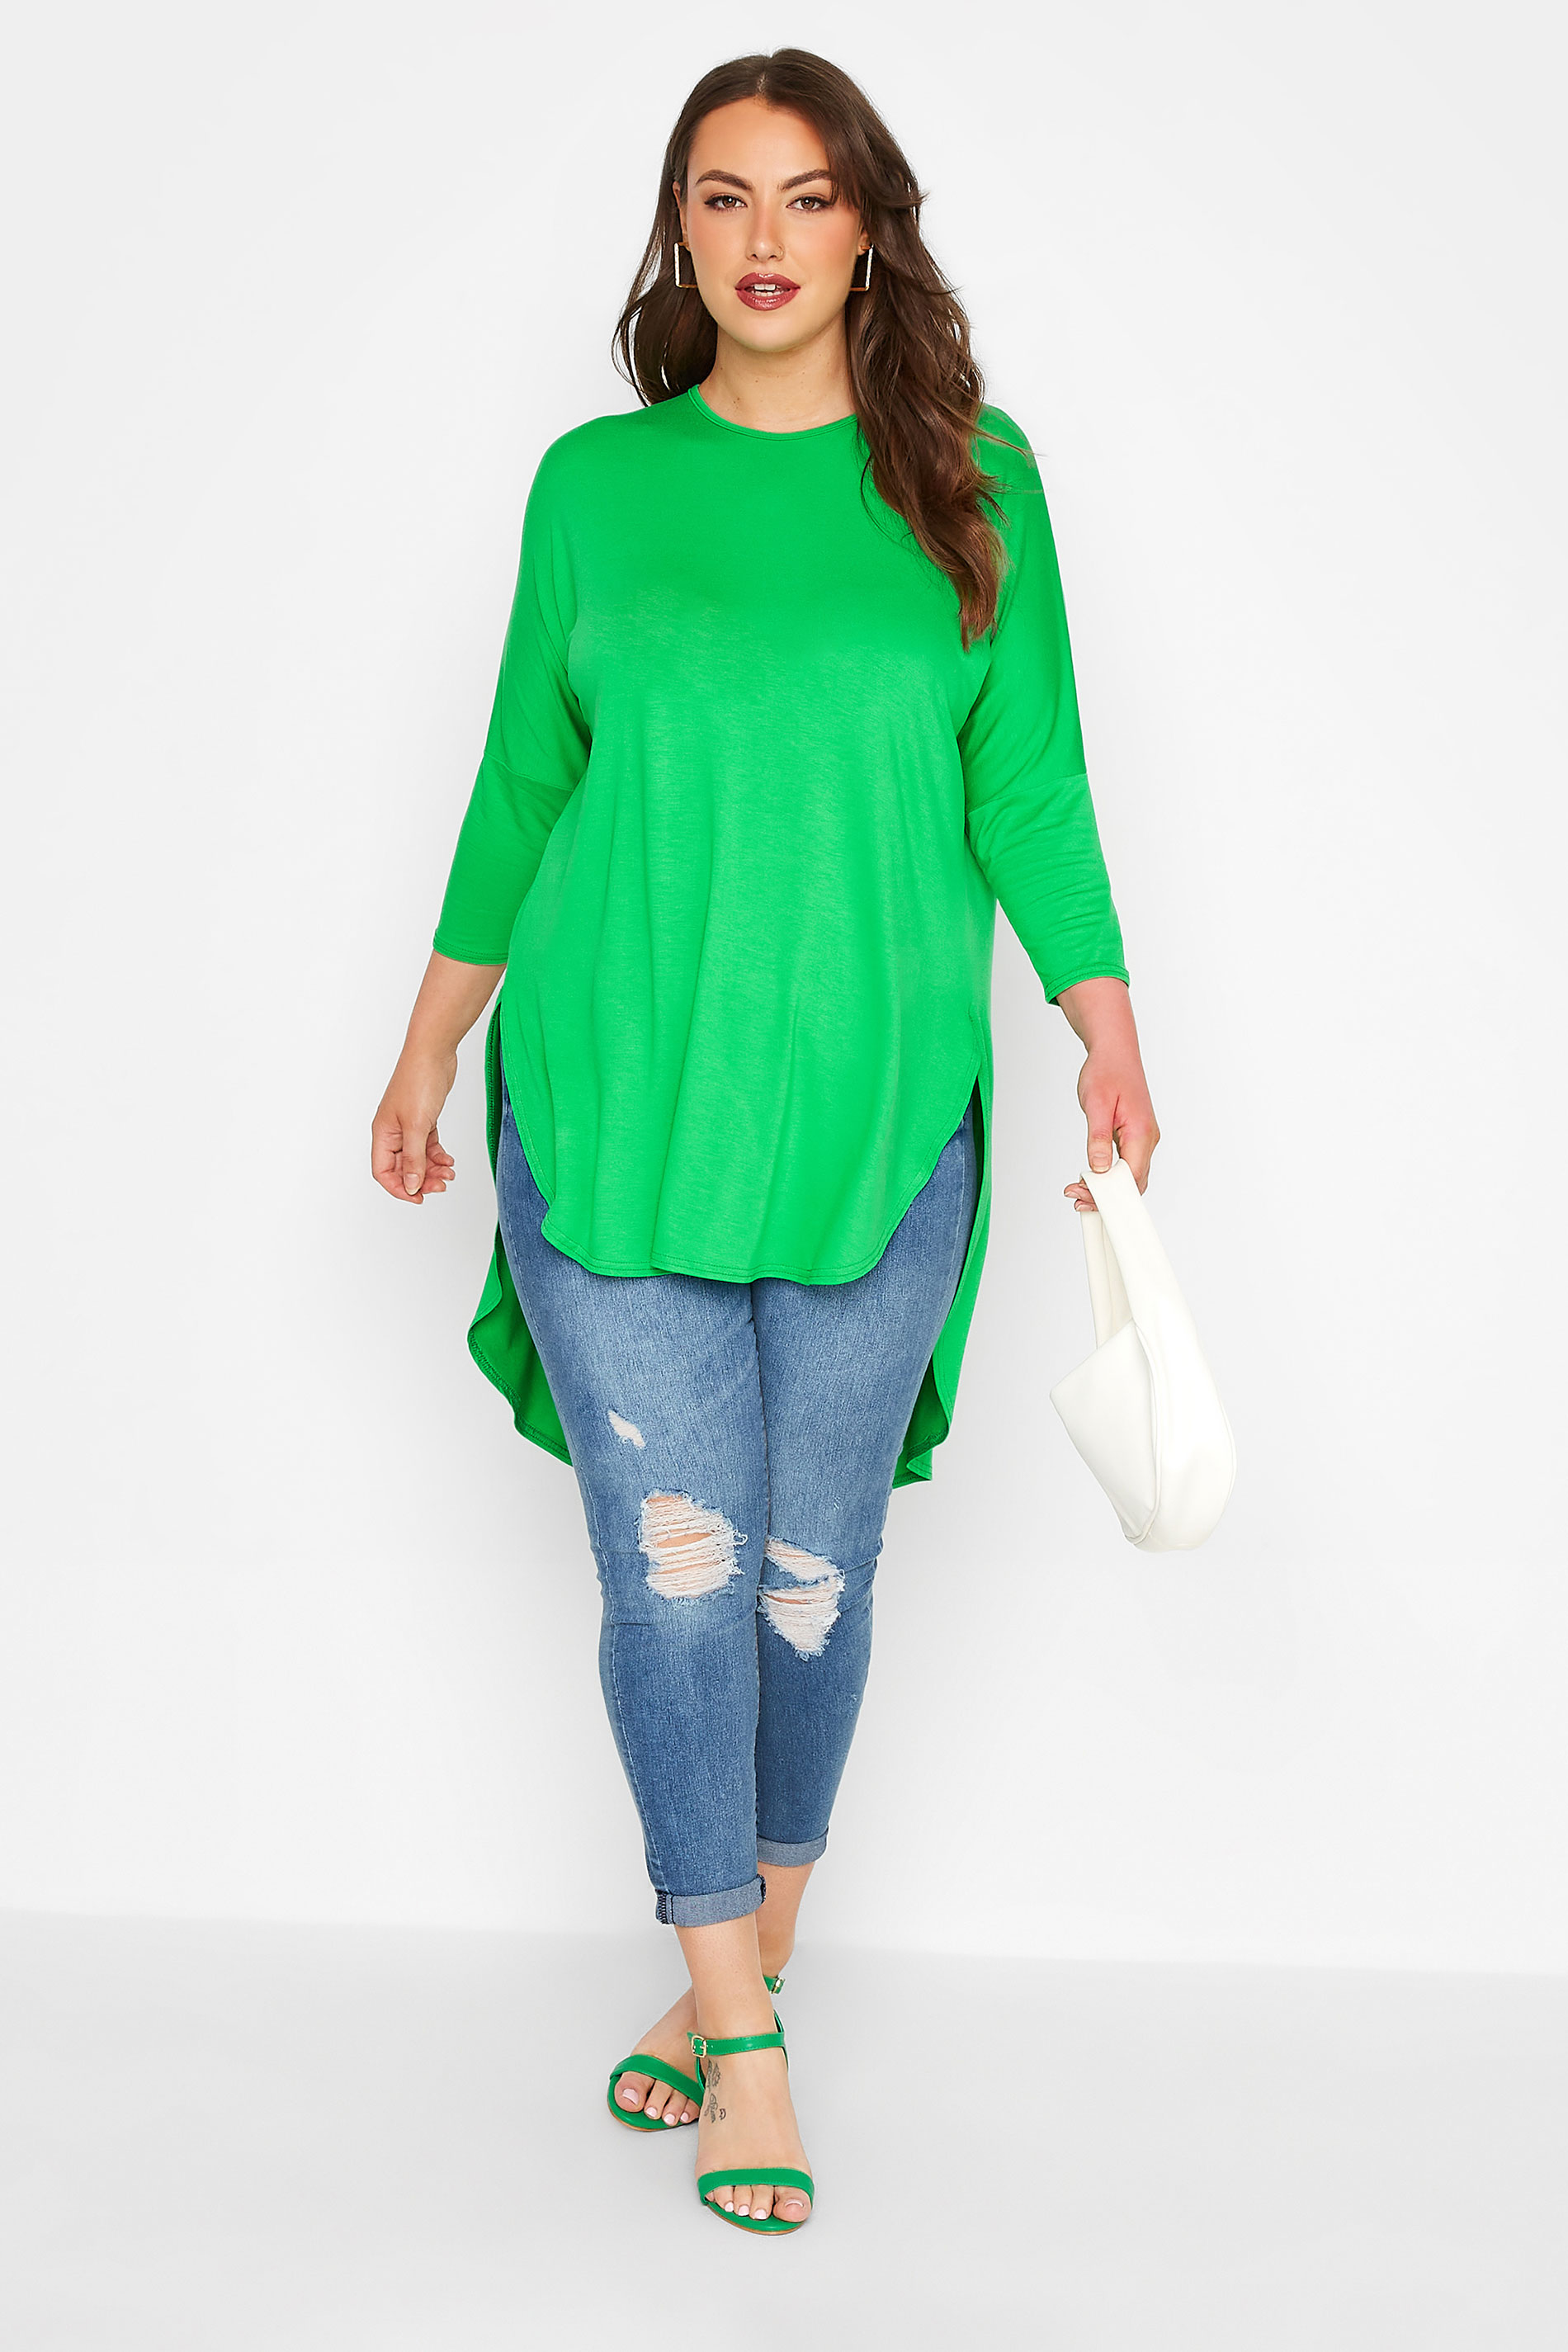 Grande taille  Tops Grande taille  Tops Ourlet Plongeant | LIMITED COLLECTION - T-Shirt Vert Pomme Manches Longues Ourlet Plongeant - JF45984